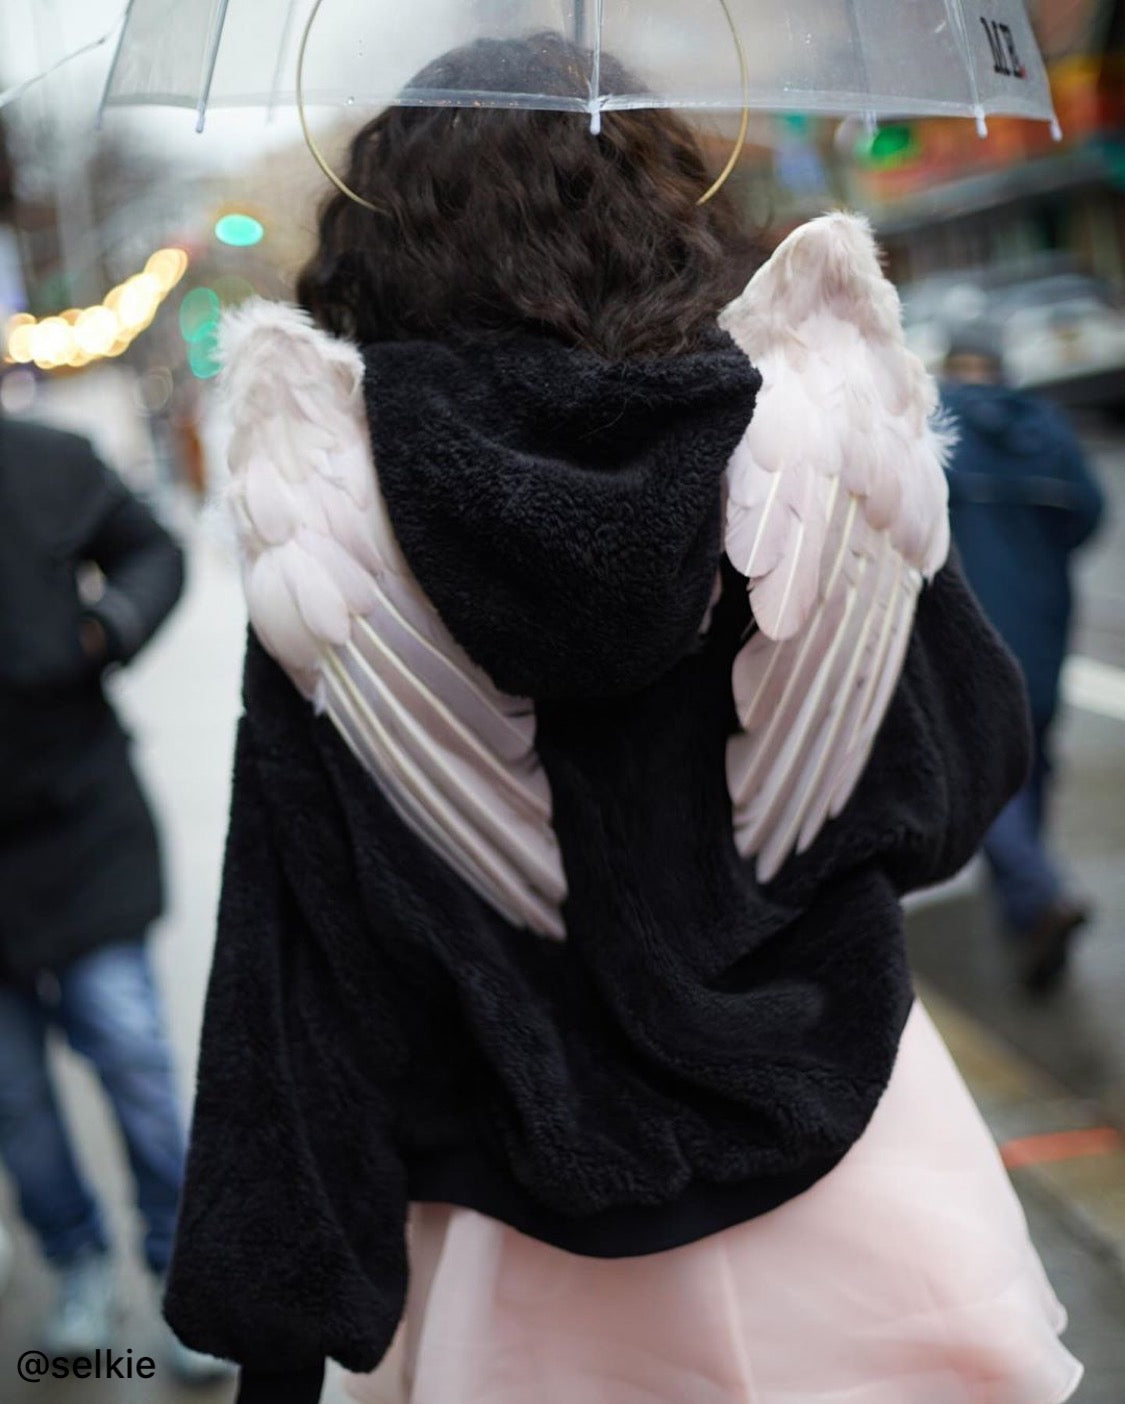 Designer Made Floating Wings in Blush Peach